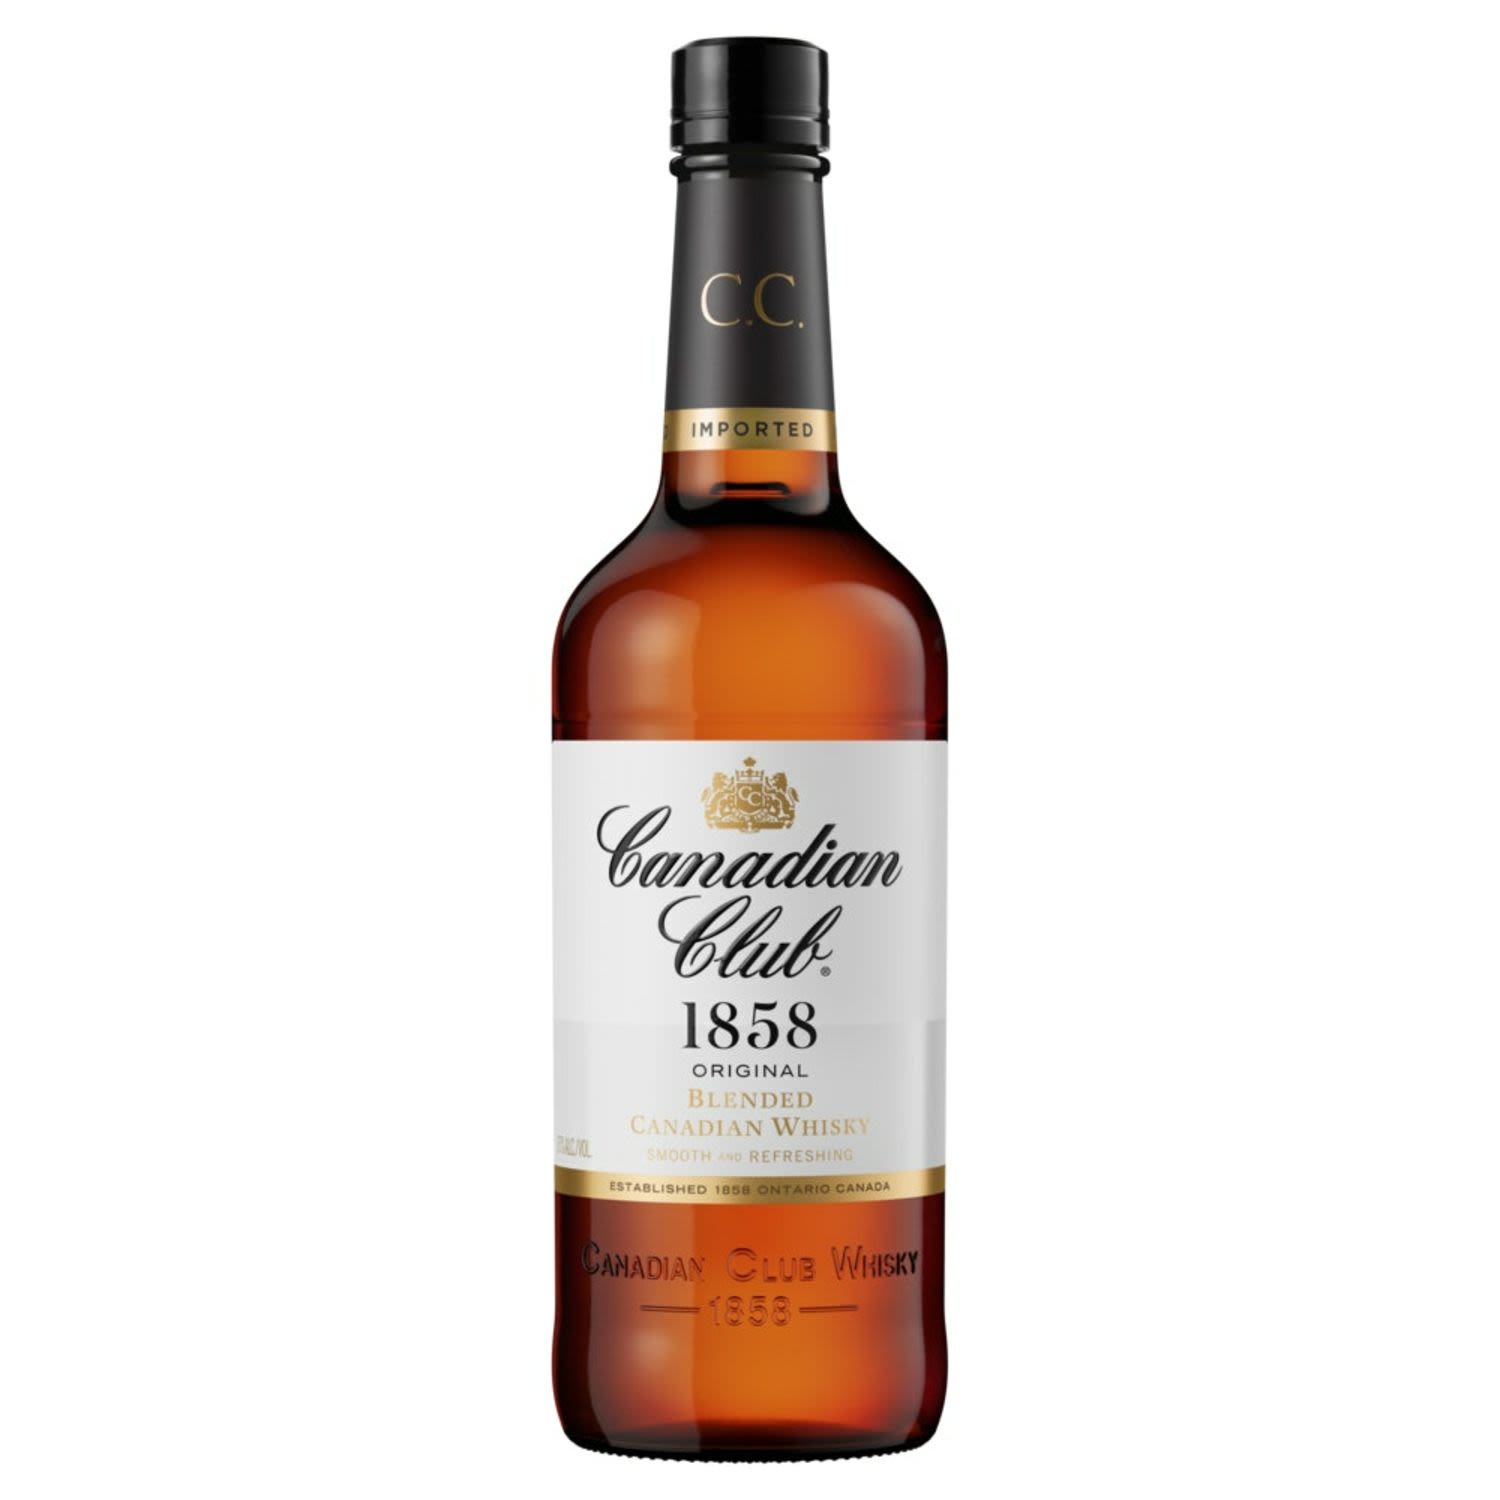 Canadian Club® Original 1858 whisky is pre-blended for a more refined taste profile and aged, longer than the three years required by law, in white-oak American bourbon barrels for a smooth, distinctive rich, oak flavour.<br /> <br />Alcohol Volume: 37.00%<br /><br />Pack Format: Bottle<br /><br />Standard Drinks: 20.5<br /><br />Pack Type: Bottle<br /><br />Country of Origin: Canada<br />